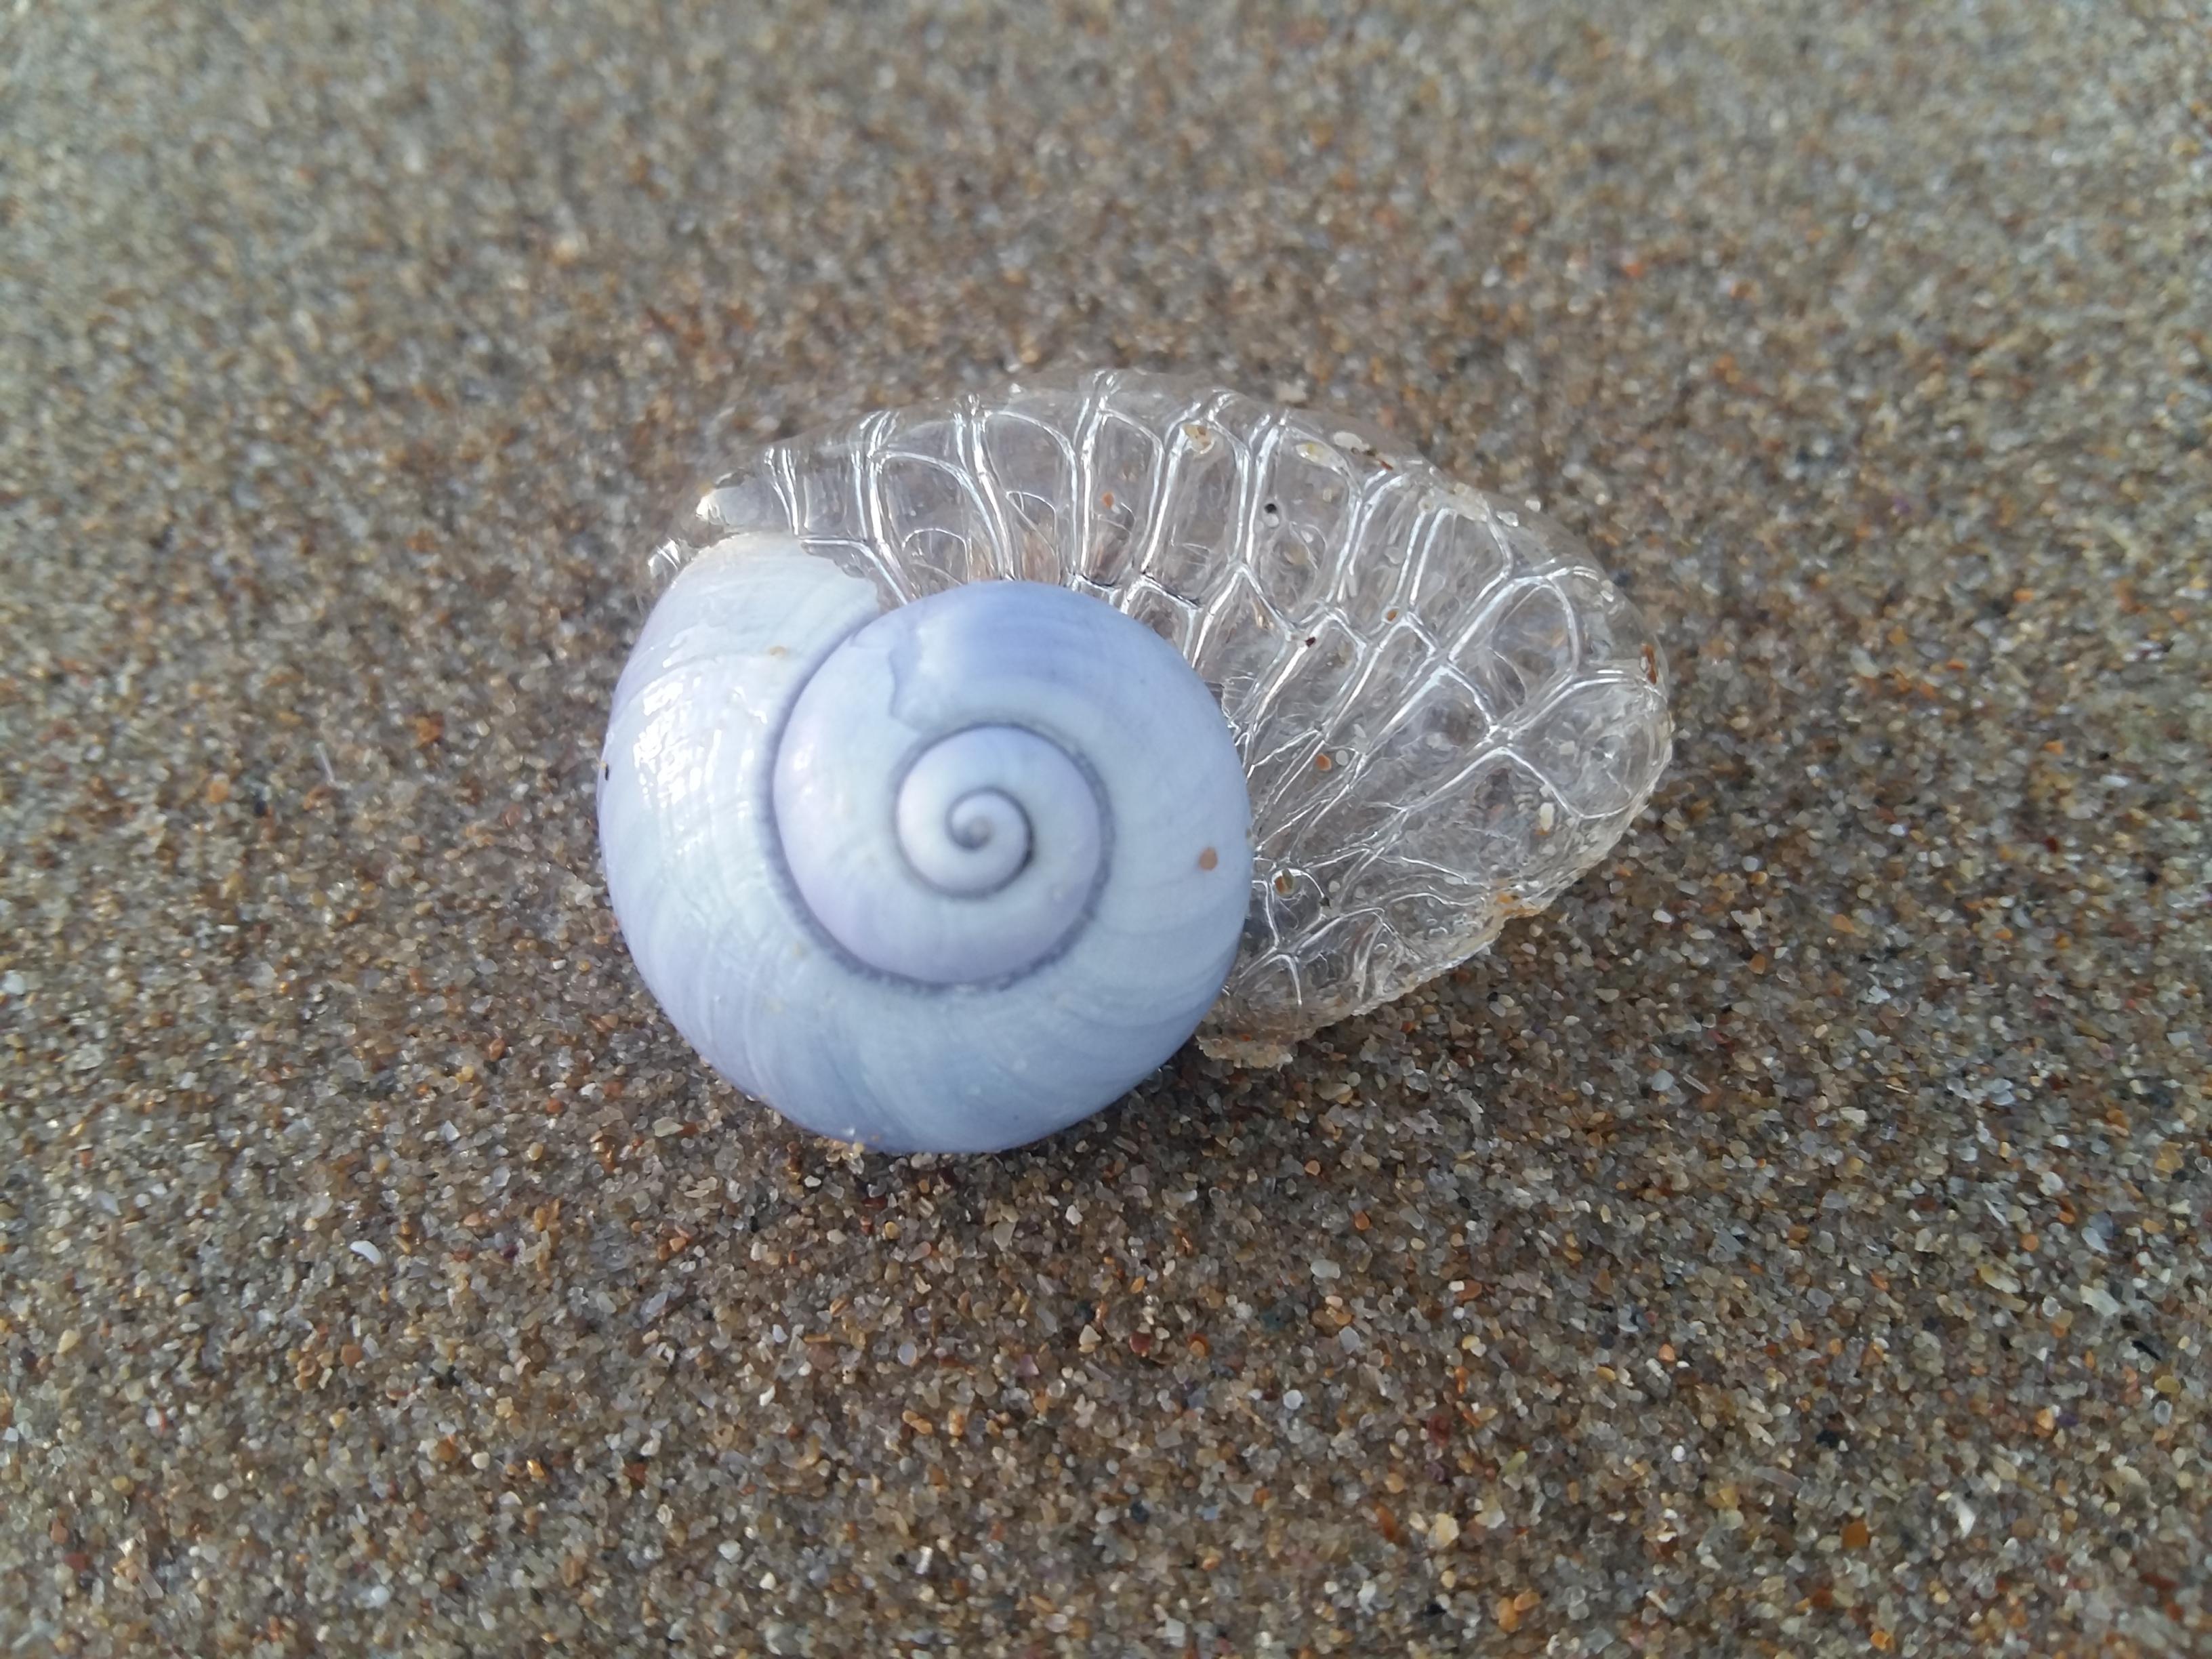 A sea snail I found with a jelly-like foam coming out of it. I don't ...